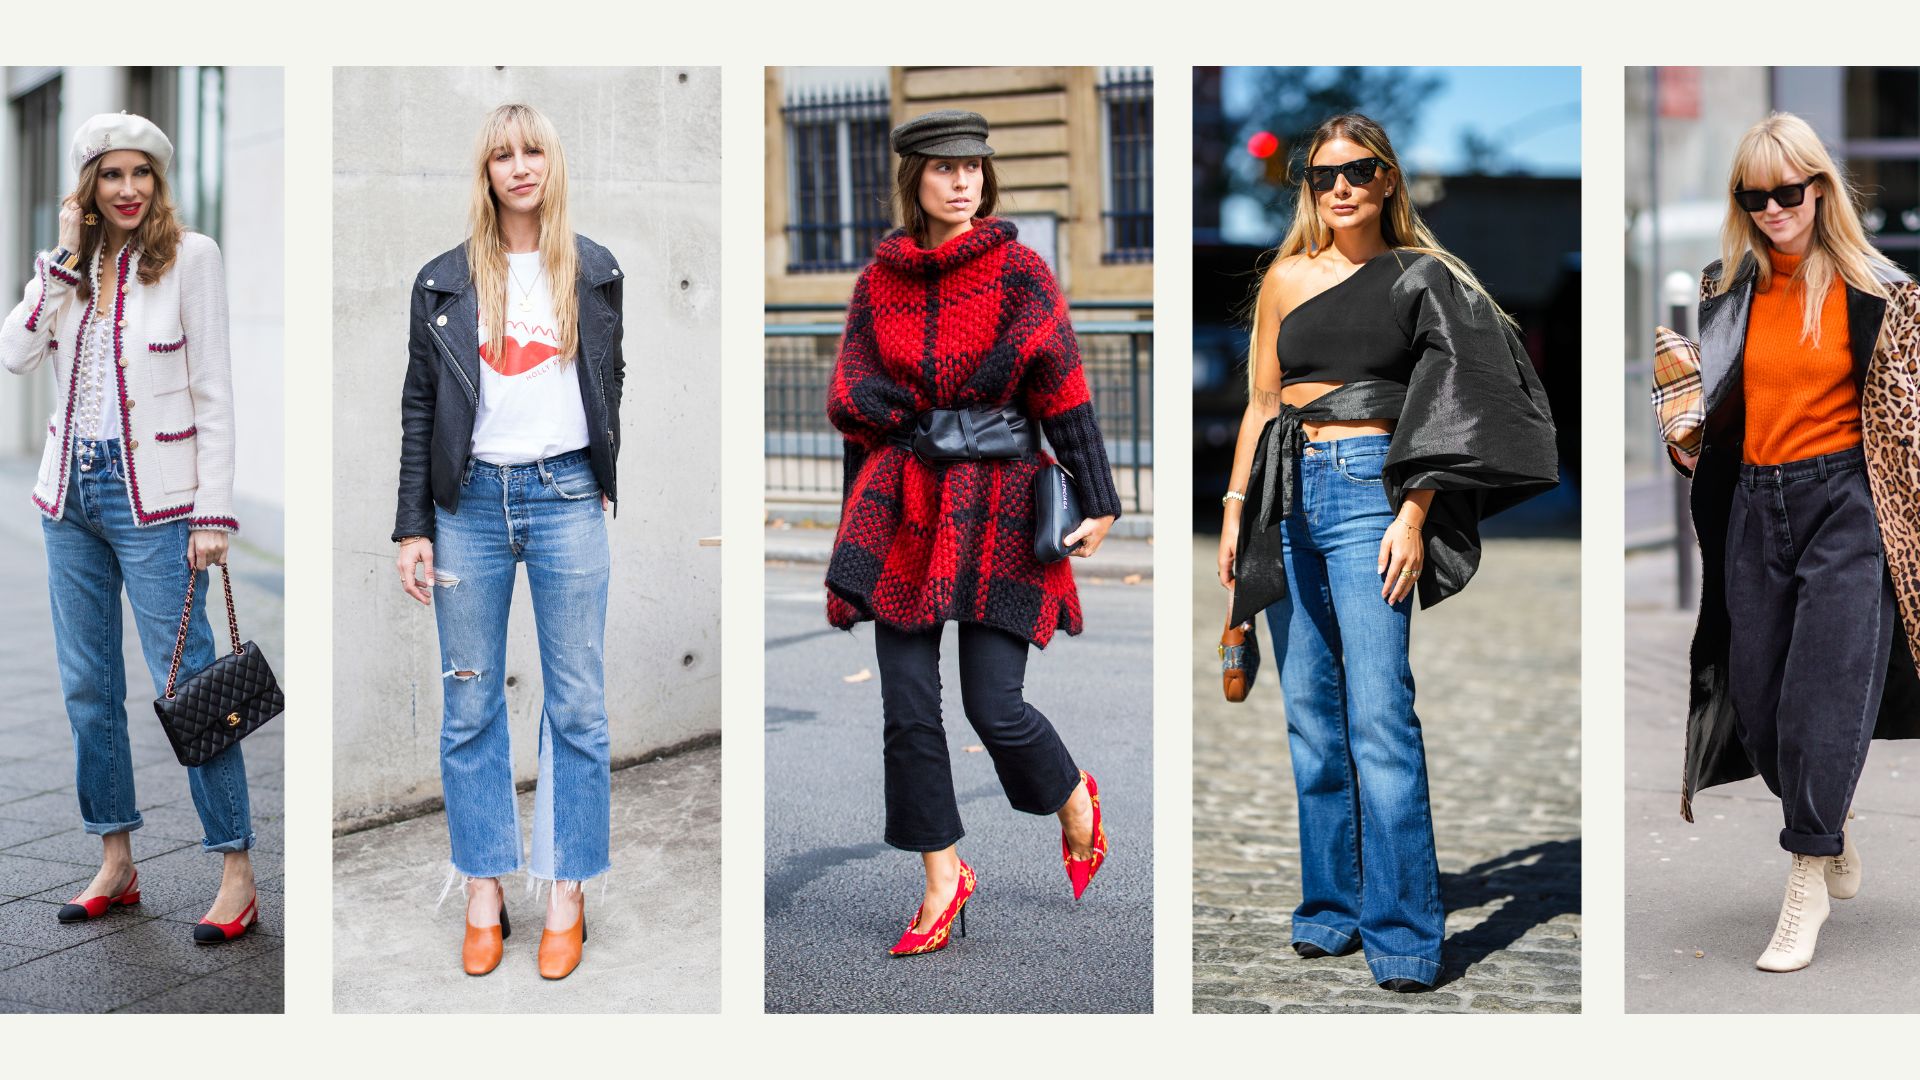 How to style jeans: 7 ways to wear jeans to refresh your look | Woman & Home